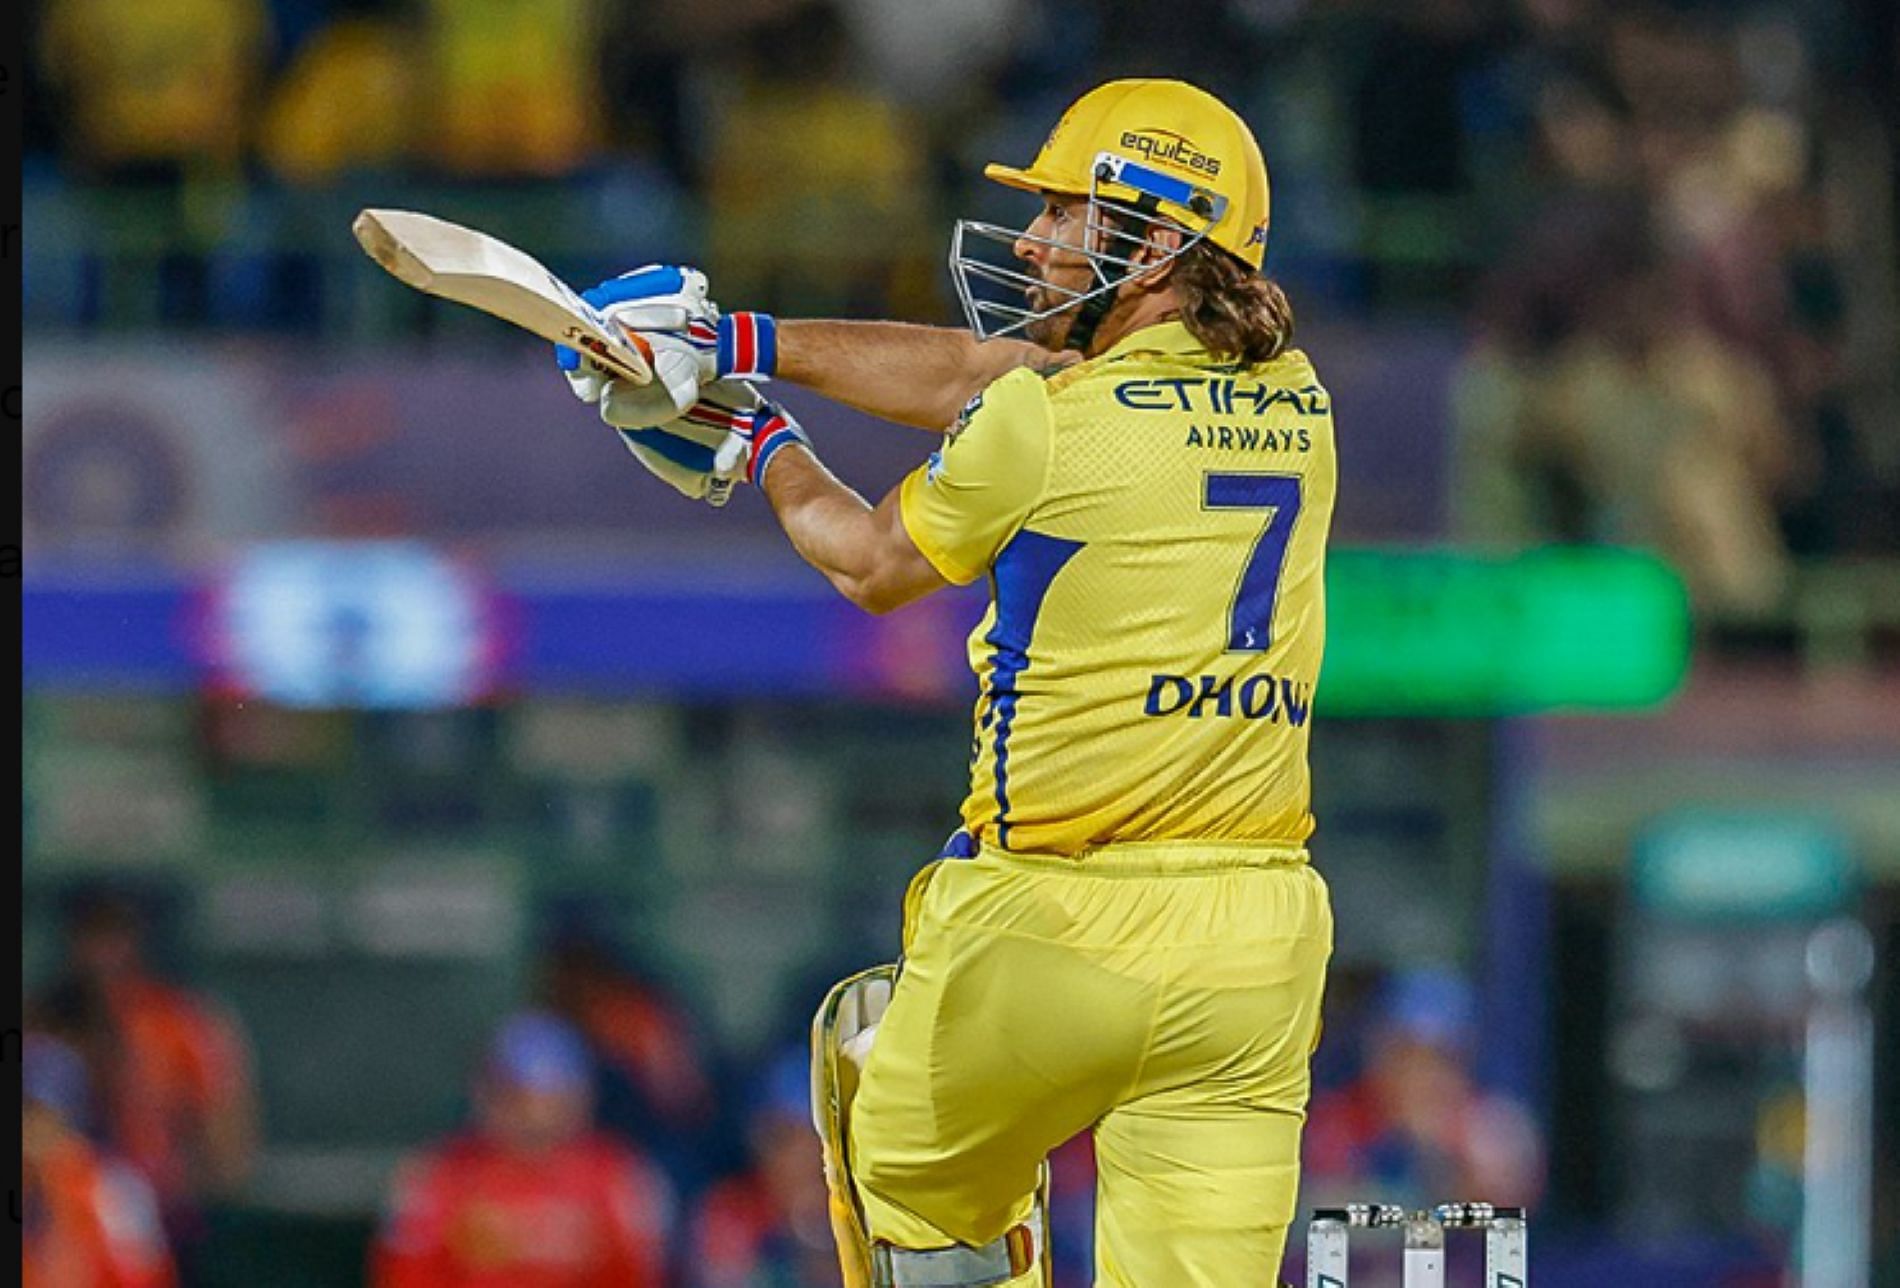 Dhoni looked in sublime form with the willow against DC [Credit: CSK twitter handle]